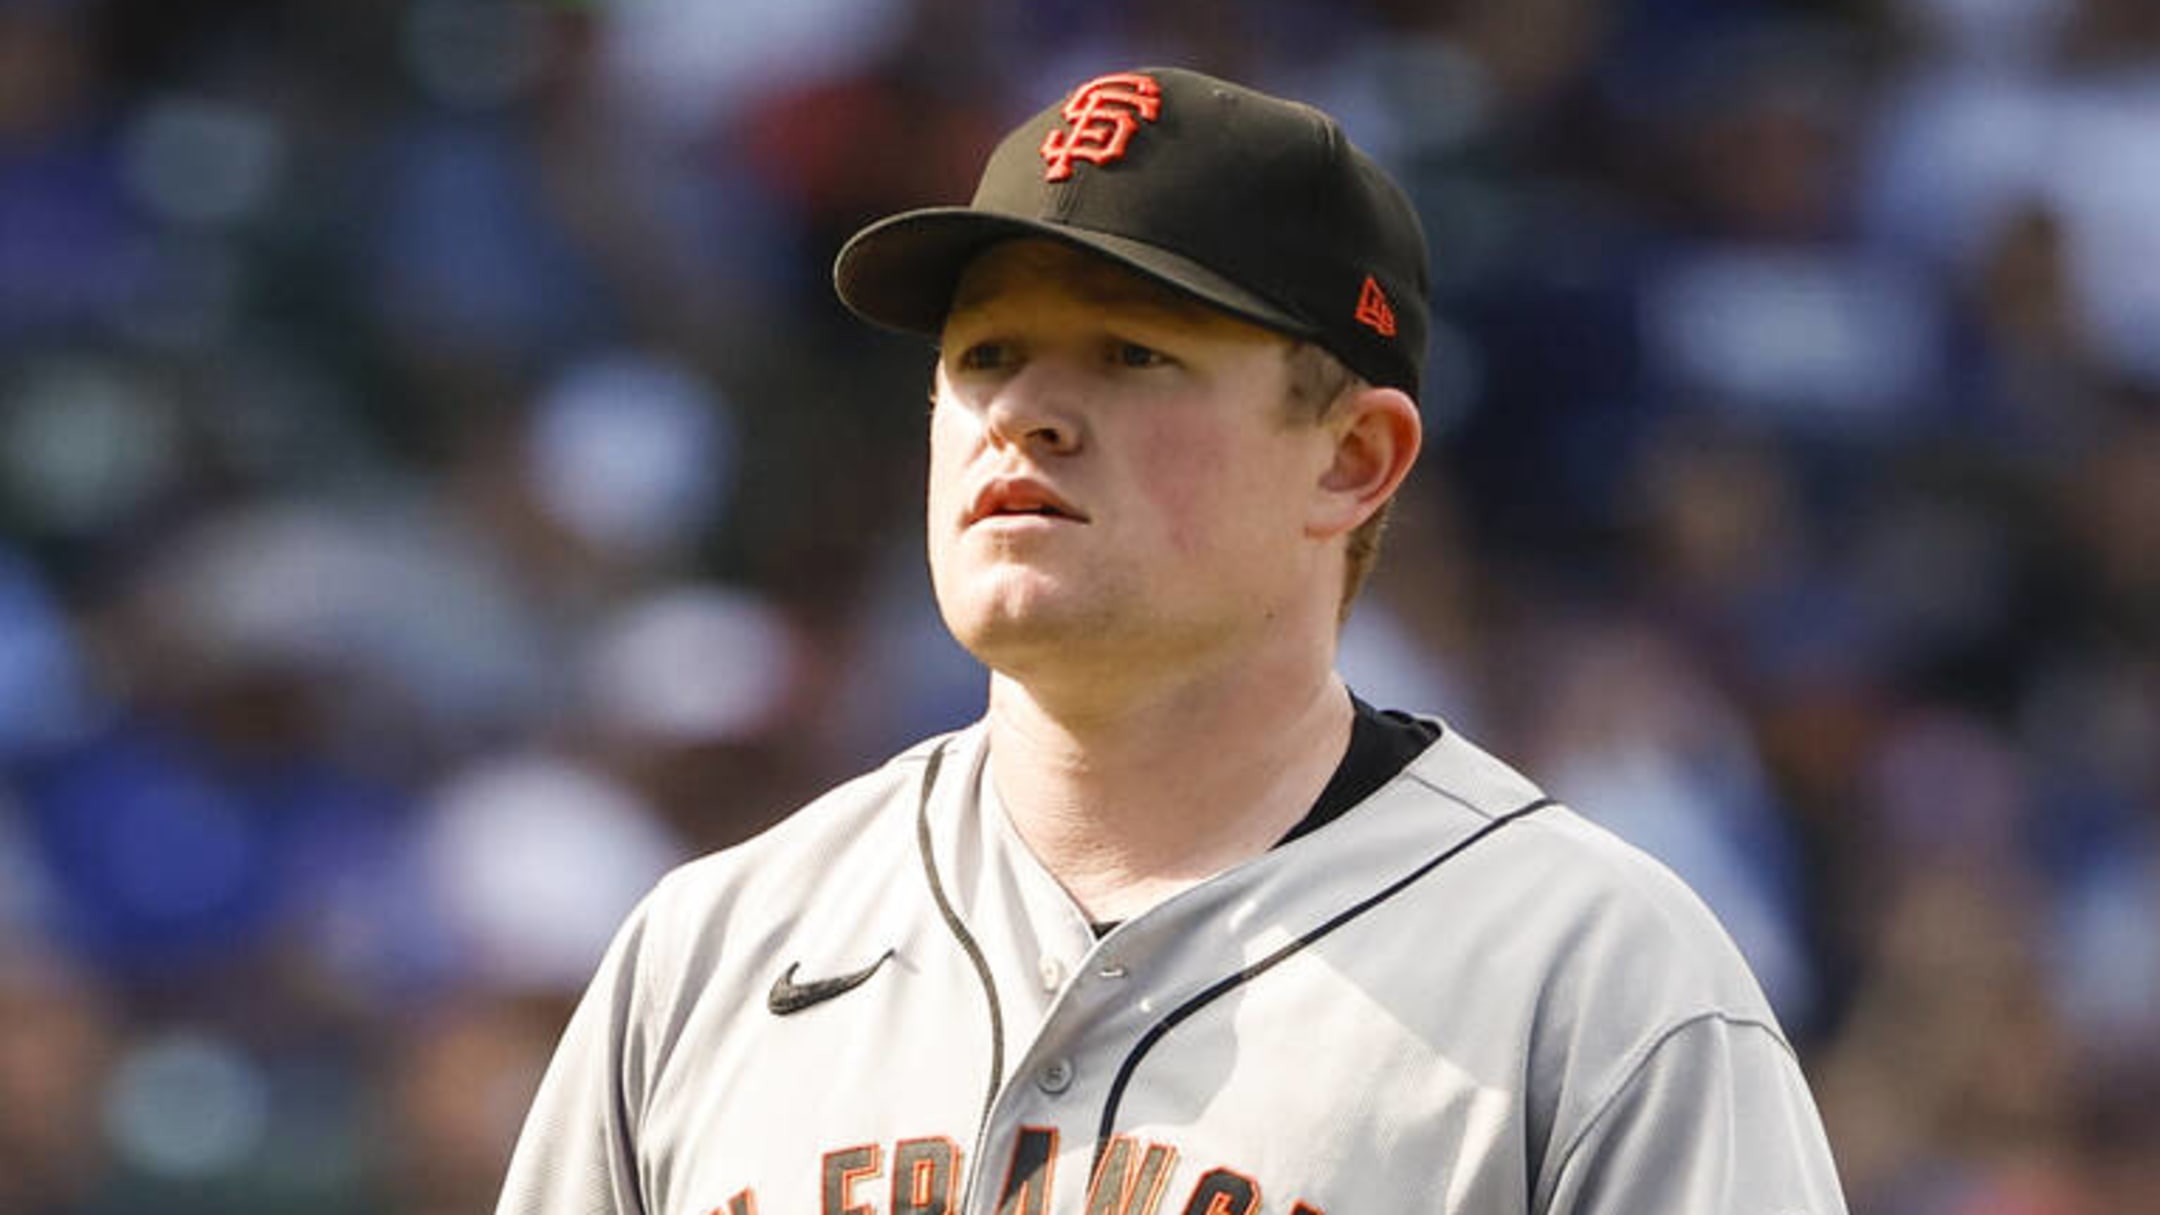 Giants pitchers contemplate a sad existence without shagging - The